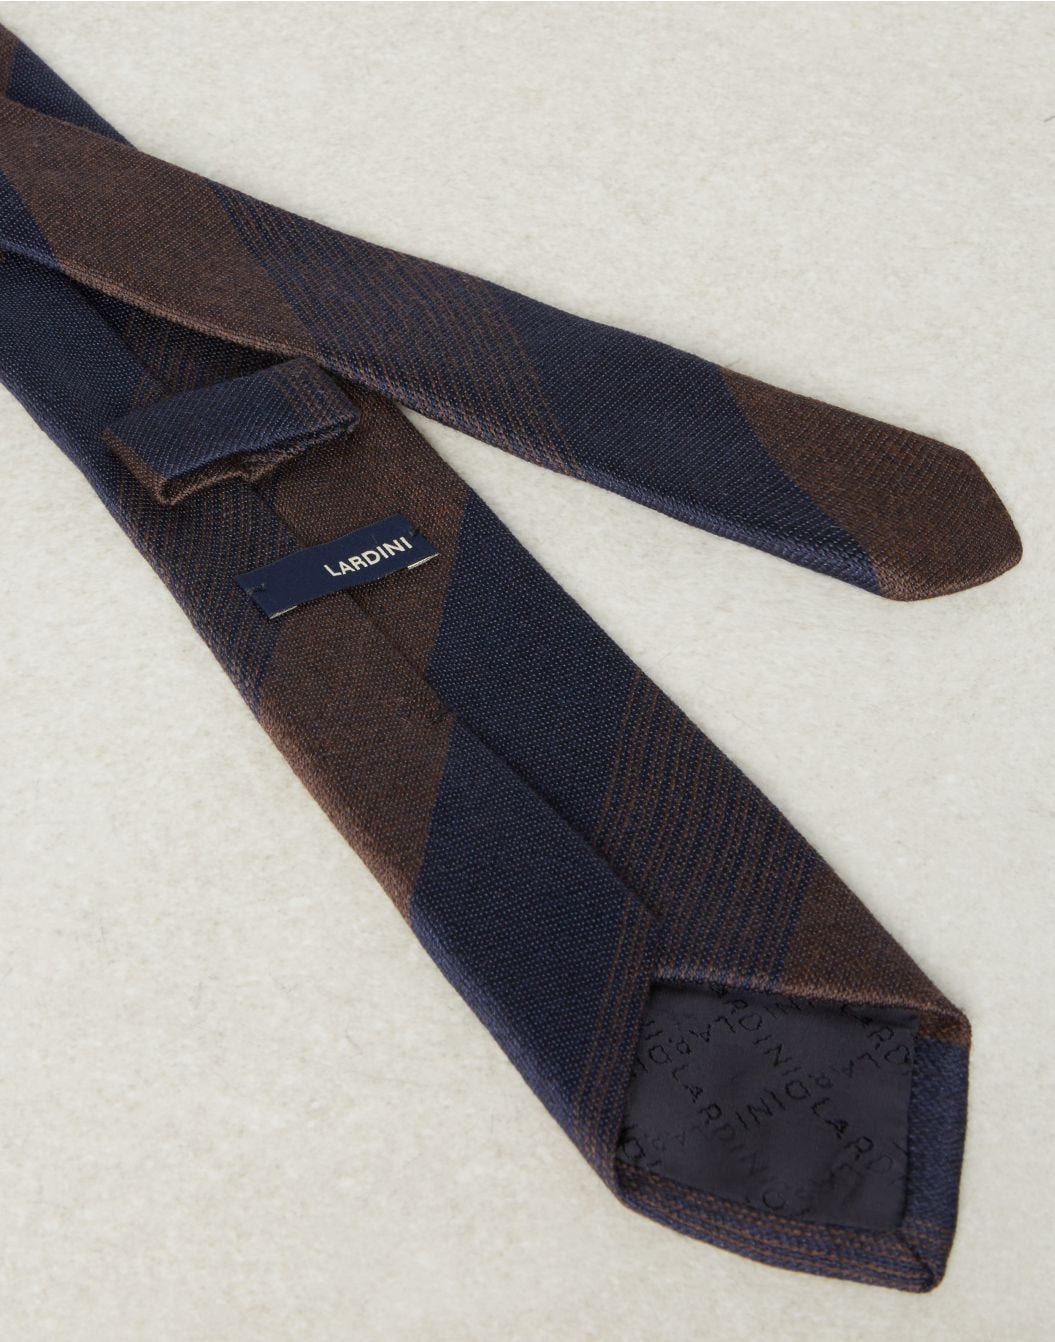 Classic regimental tie in a brown and blue colourway